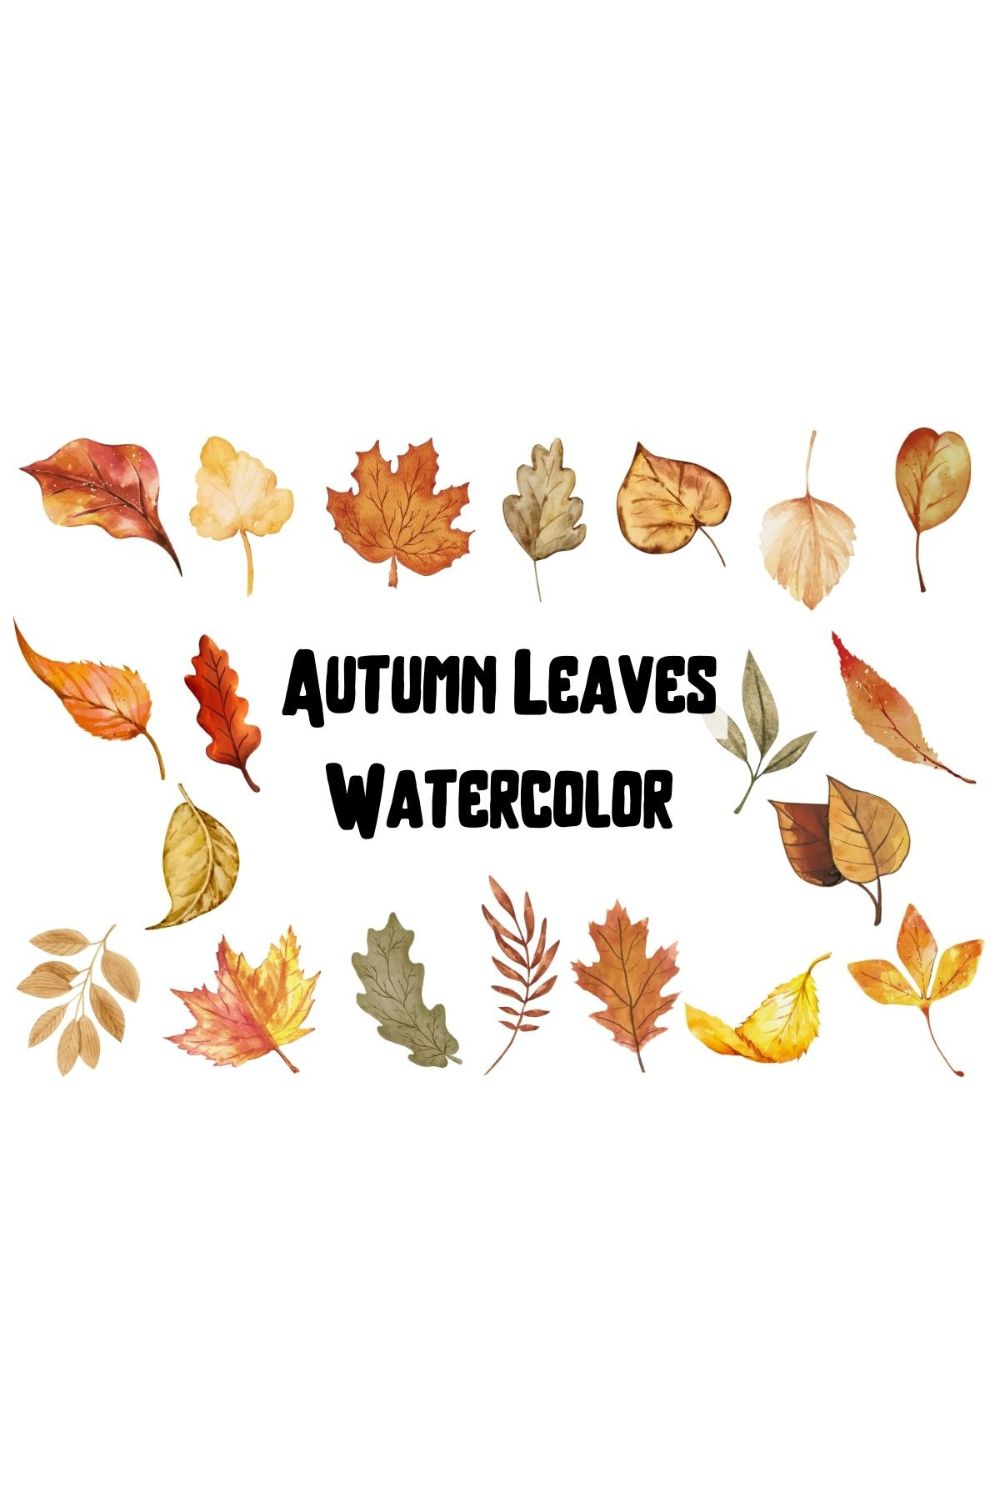 Watercolor Autumn Leaves Clipart cover image.